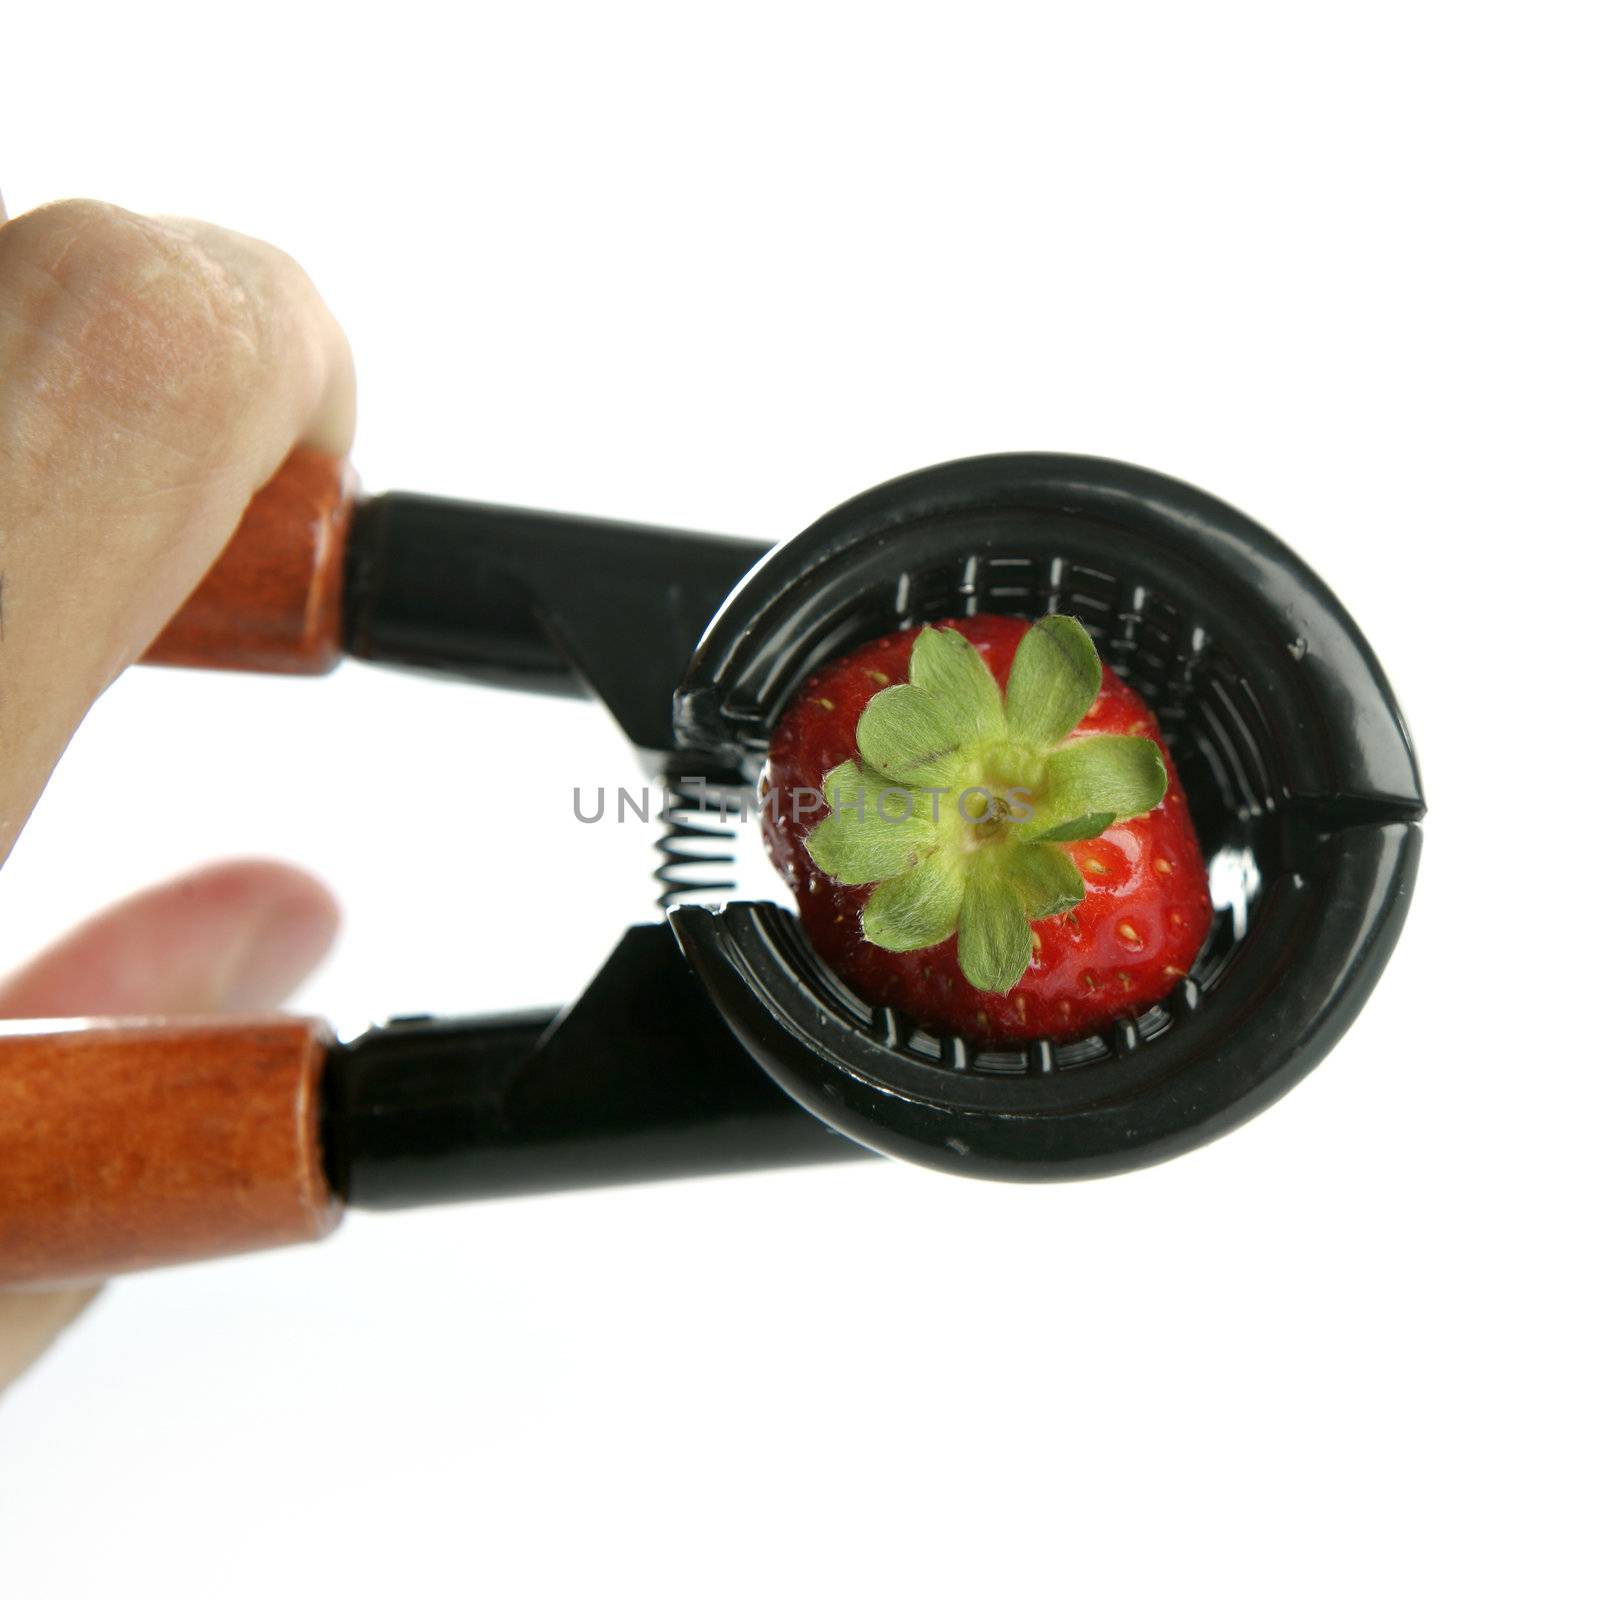 Hand pressuring a strawberry with nutcracker over white background